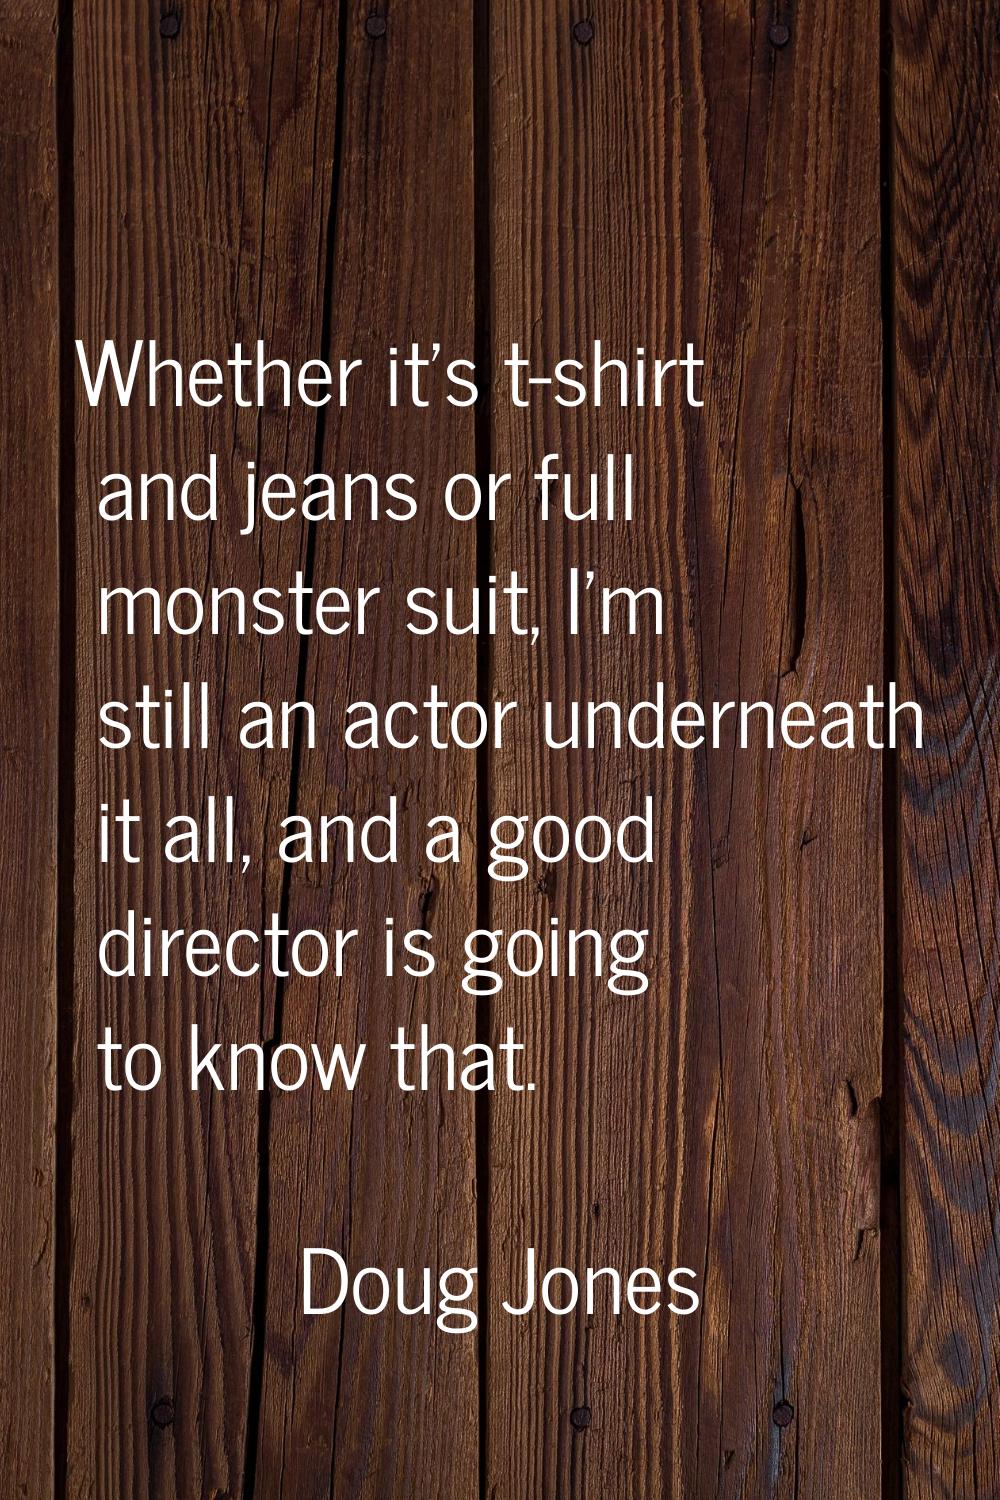 Whether it's t-shirt and jeans or full monster suit, I'm still an actor underneath it all, and a go